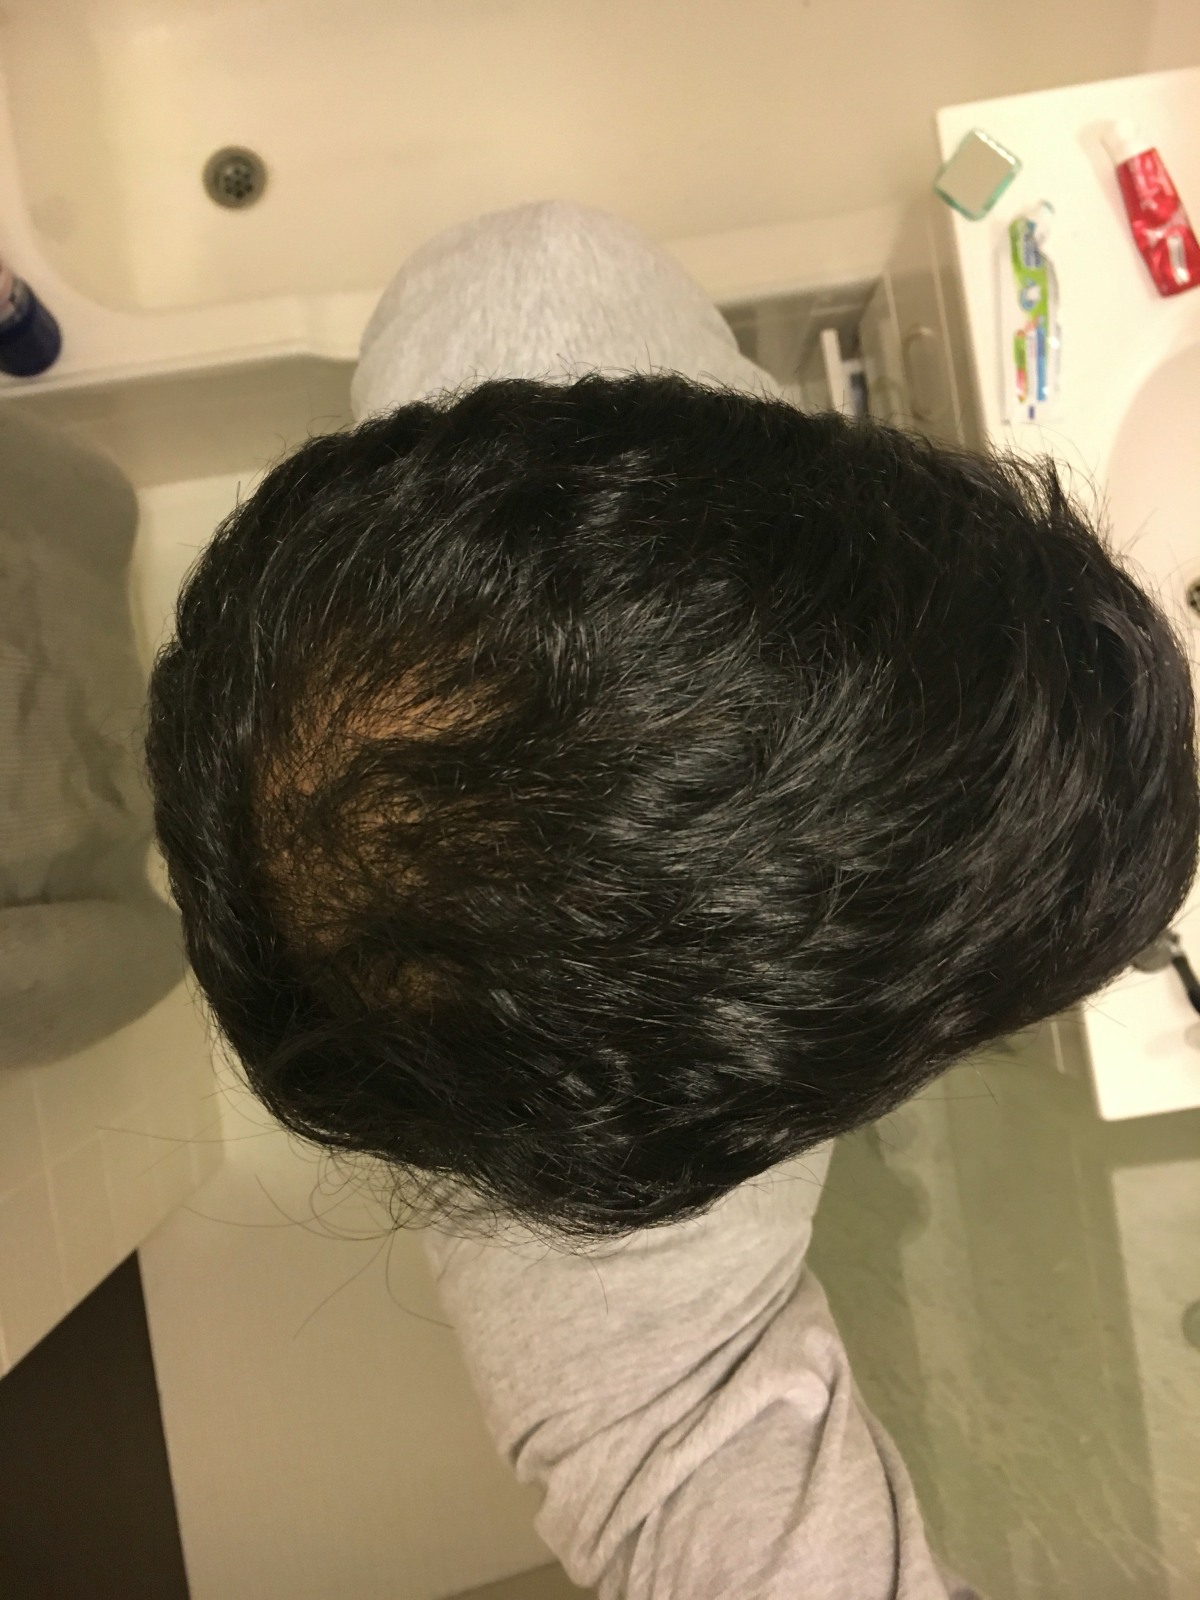 can i stop using minoxidil after 3 months